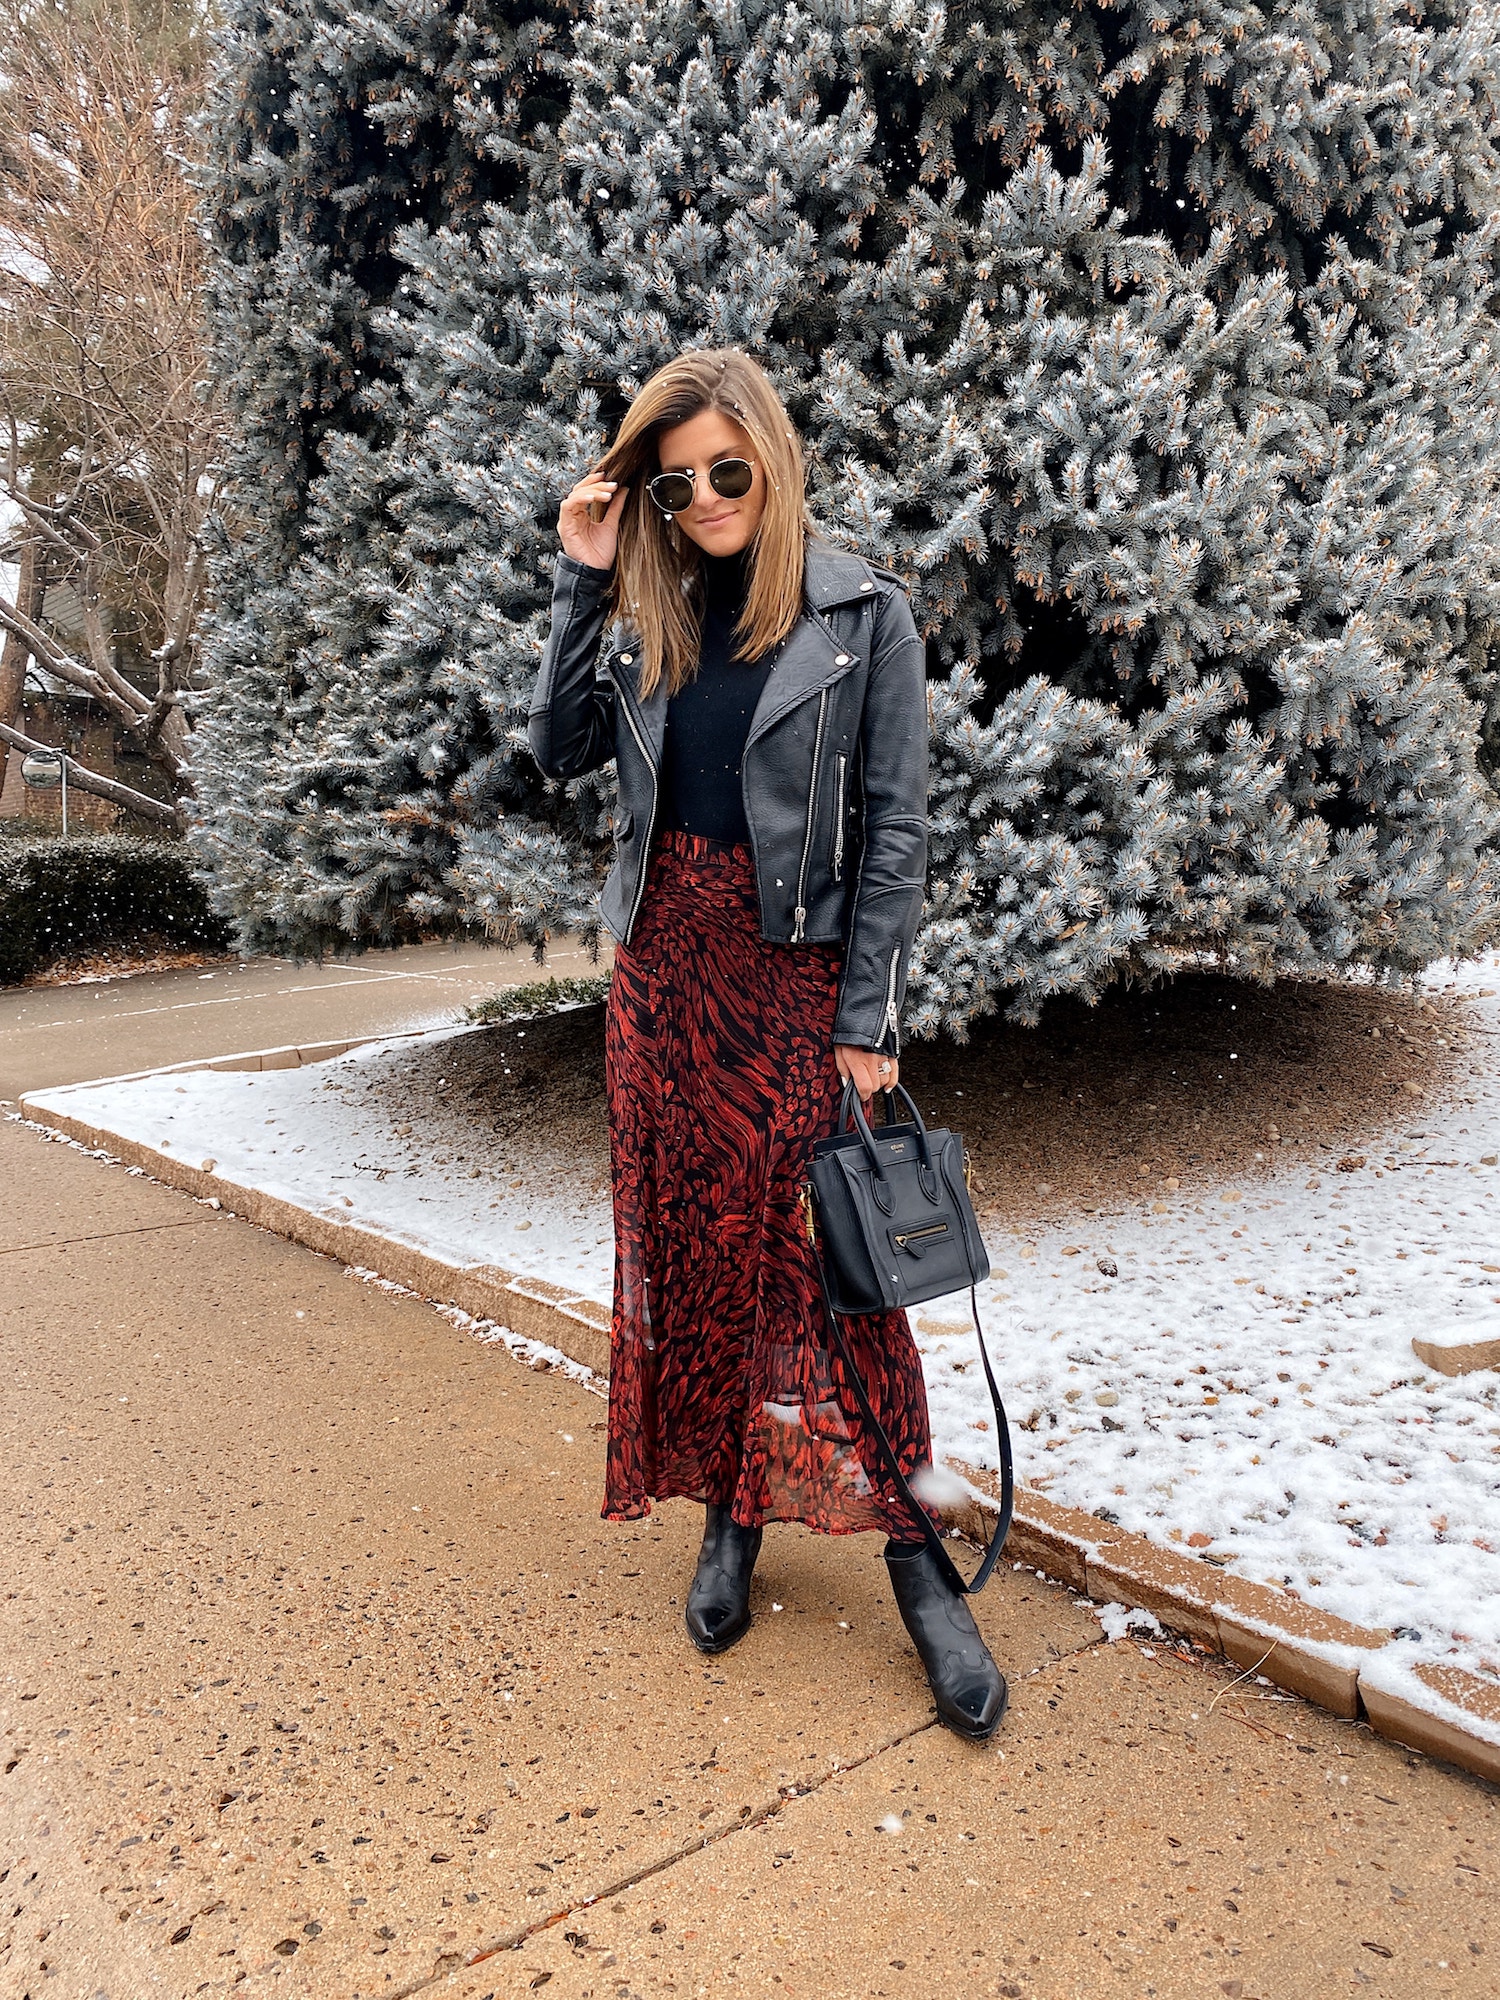 winter outfit, business casual winter outfit, red and black midi skirt, black booties, black tights, moto jacket, black turtleneck